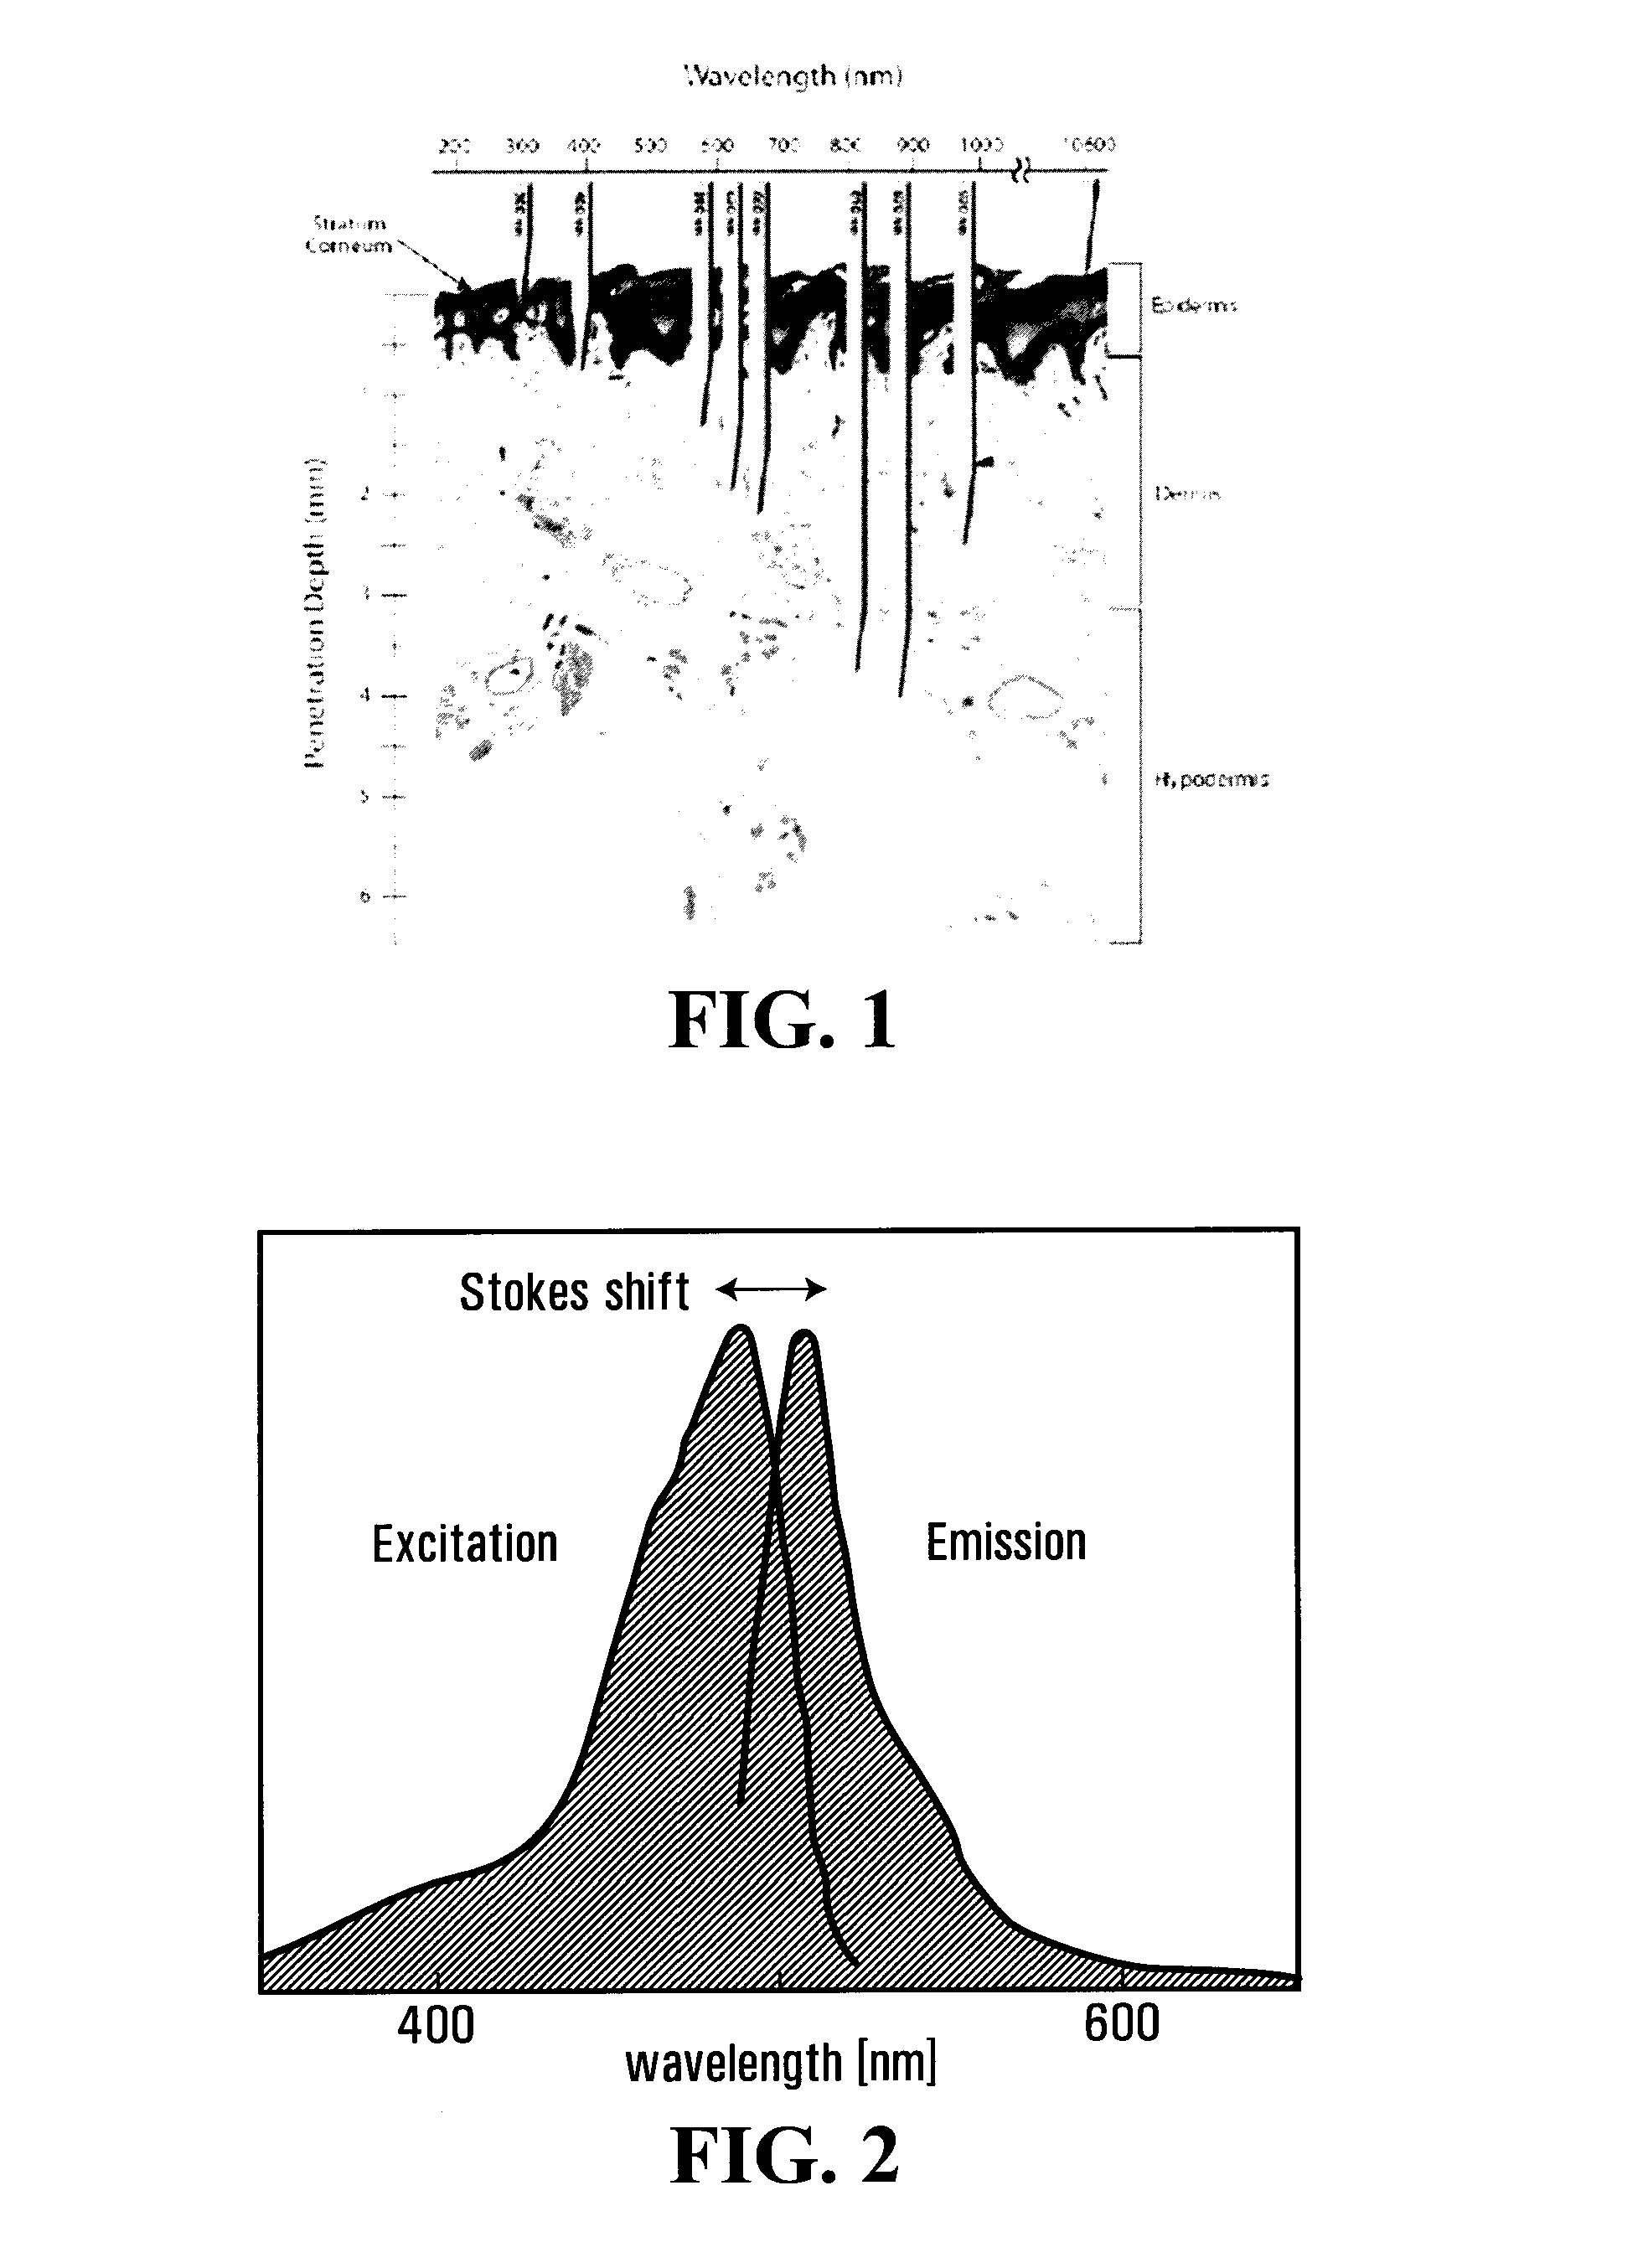 Biophotonic compositions, kits and methods